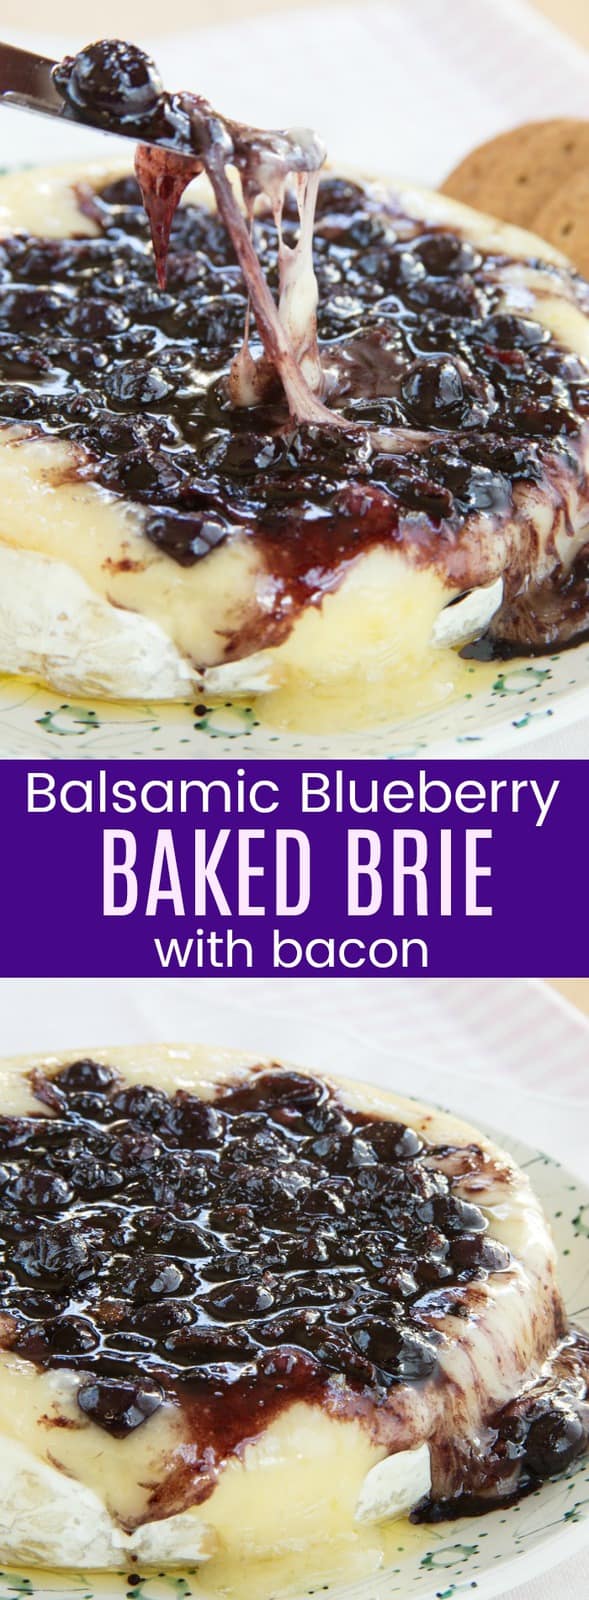 Balsamic Blueberry Baked Brie with Bacon - Cupcakes & Kale ... - 589 x 1600 jpeg 130kB